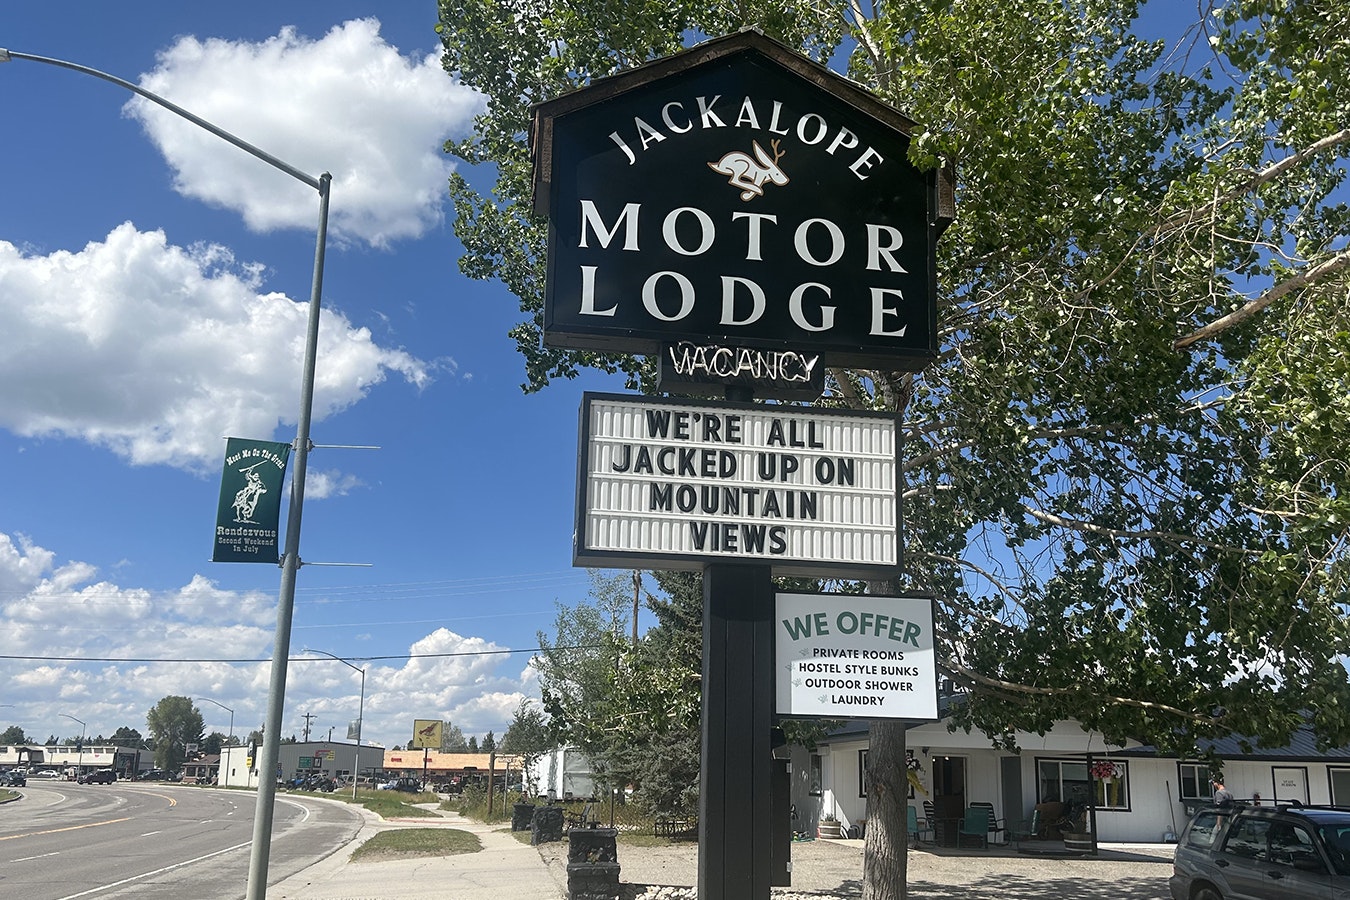 The Jackalope Motor Inn in Pinedale frequently offers clever quips on its billboard.